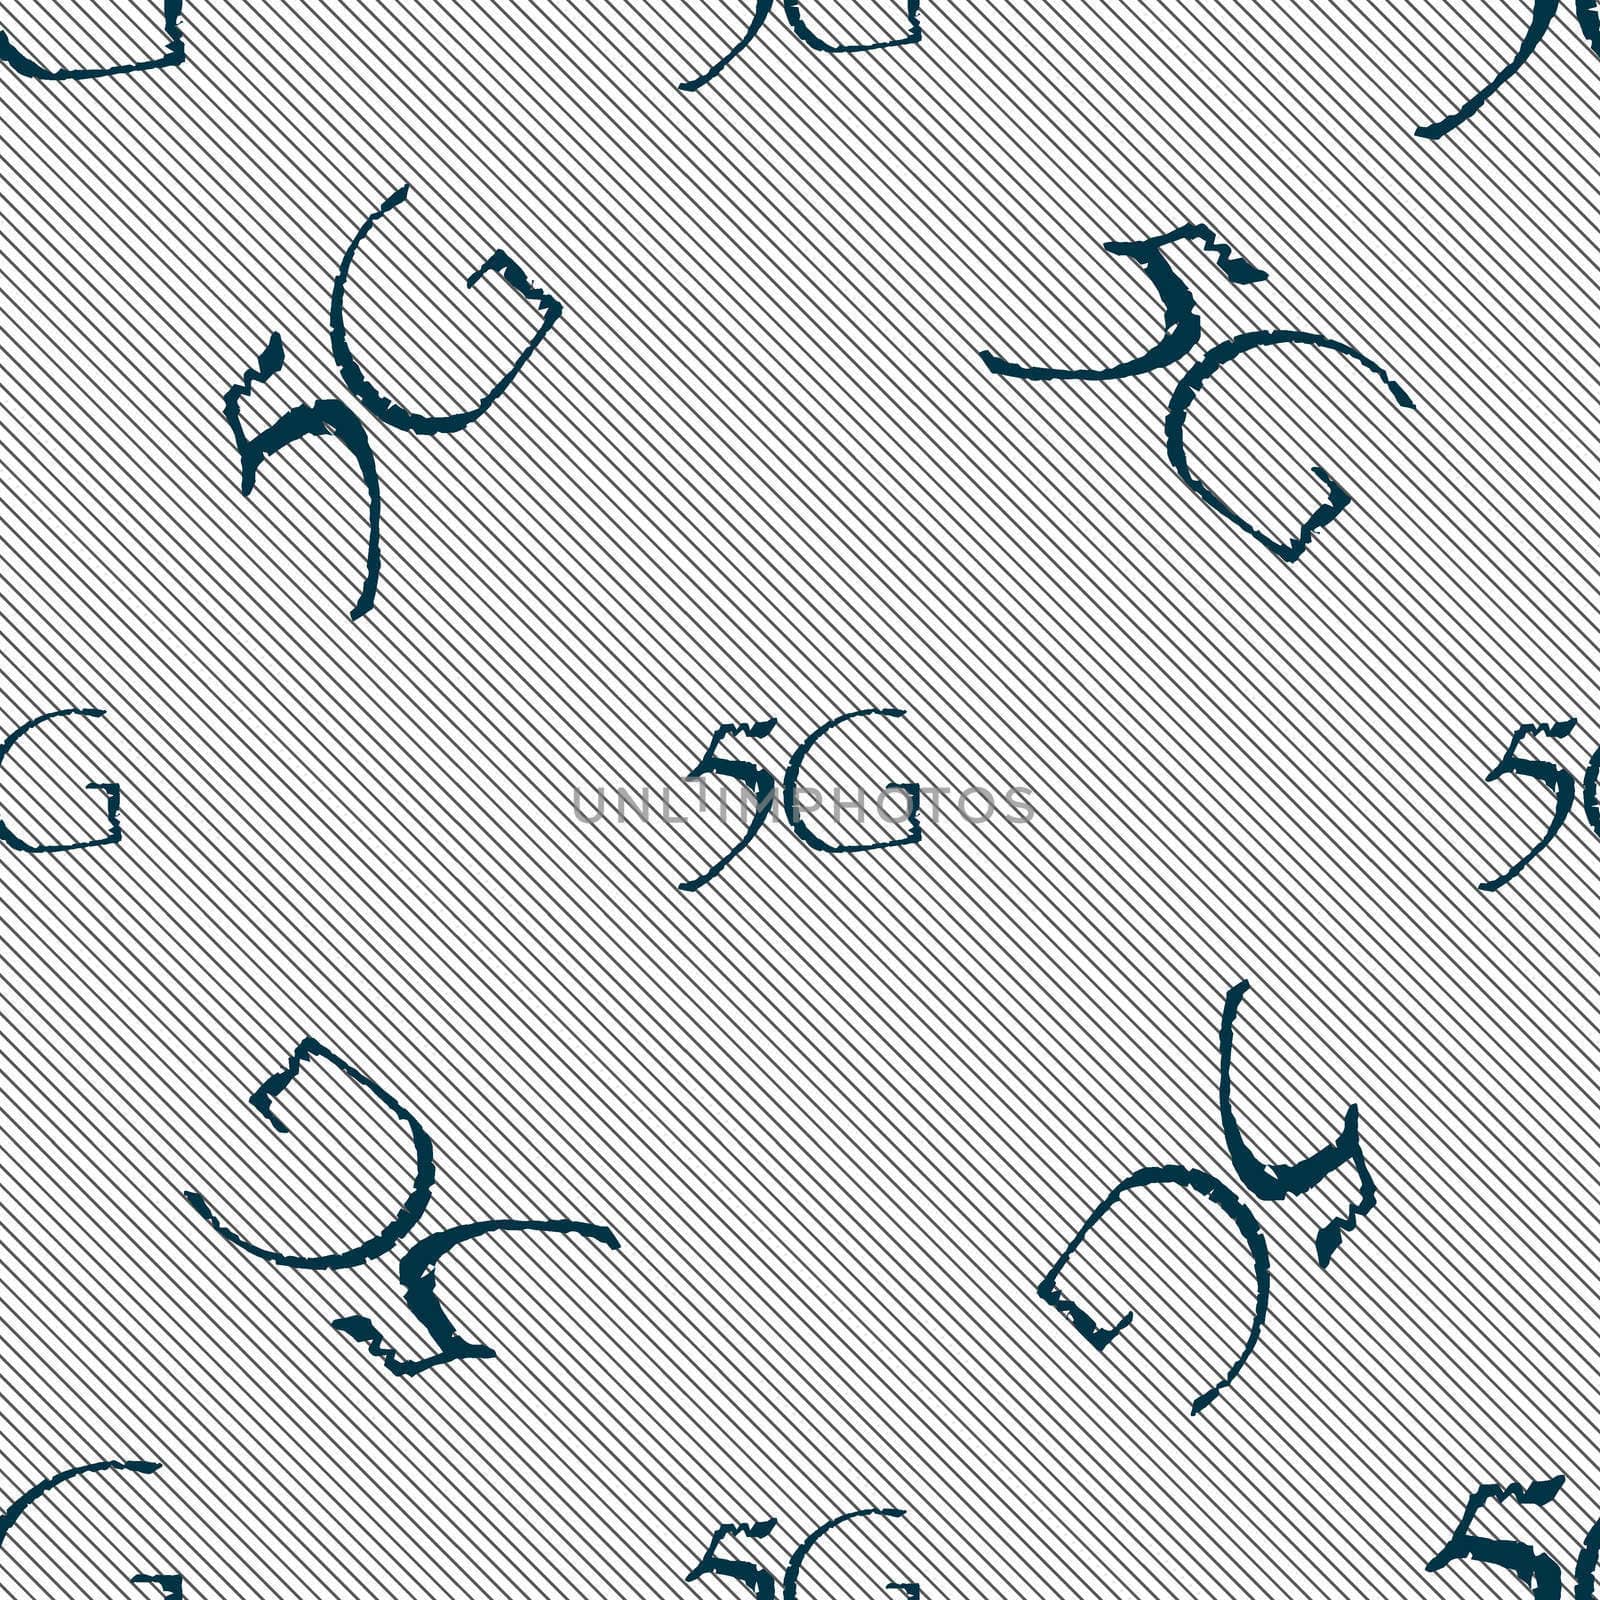 5G sign icon. Mobile telecommunications technology symbol. Seamless pattern with geometric texture. illustration